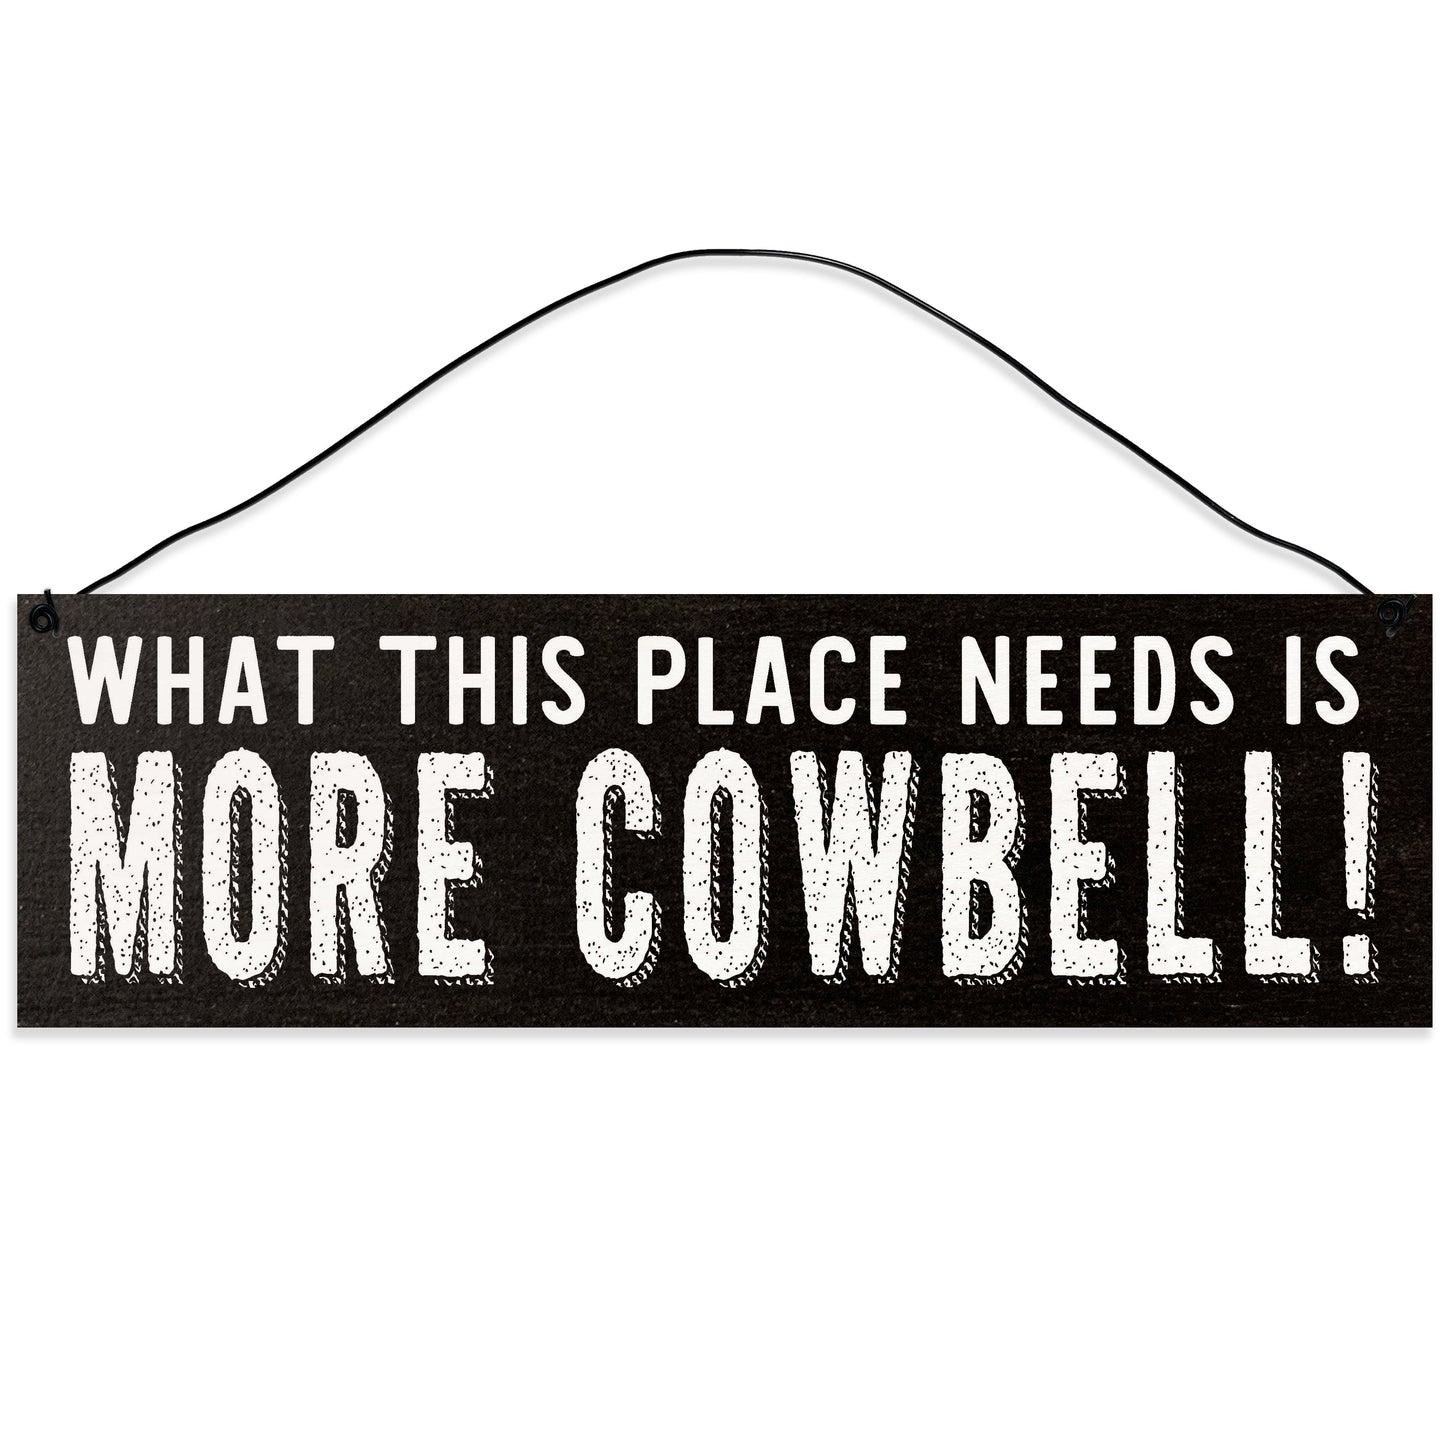 Sawyer's Mill - What This Place Needs is More Cowbell. Wood Sign for Home or Office. Measures 3x10 inches.